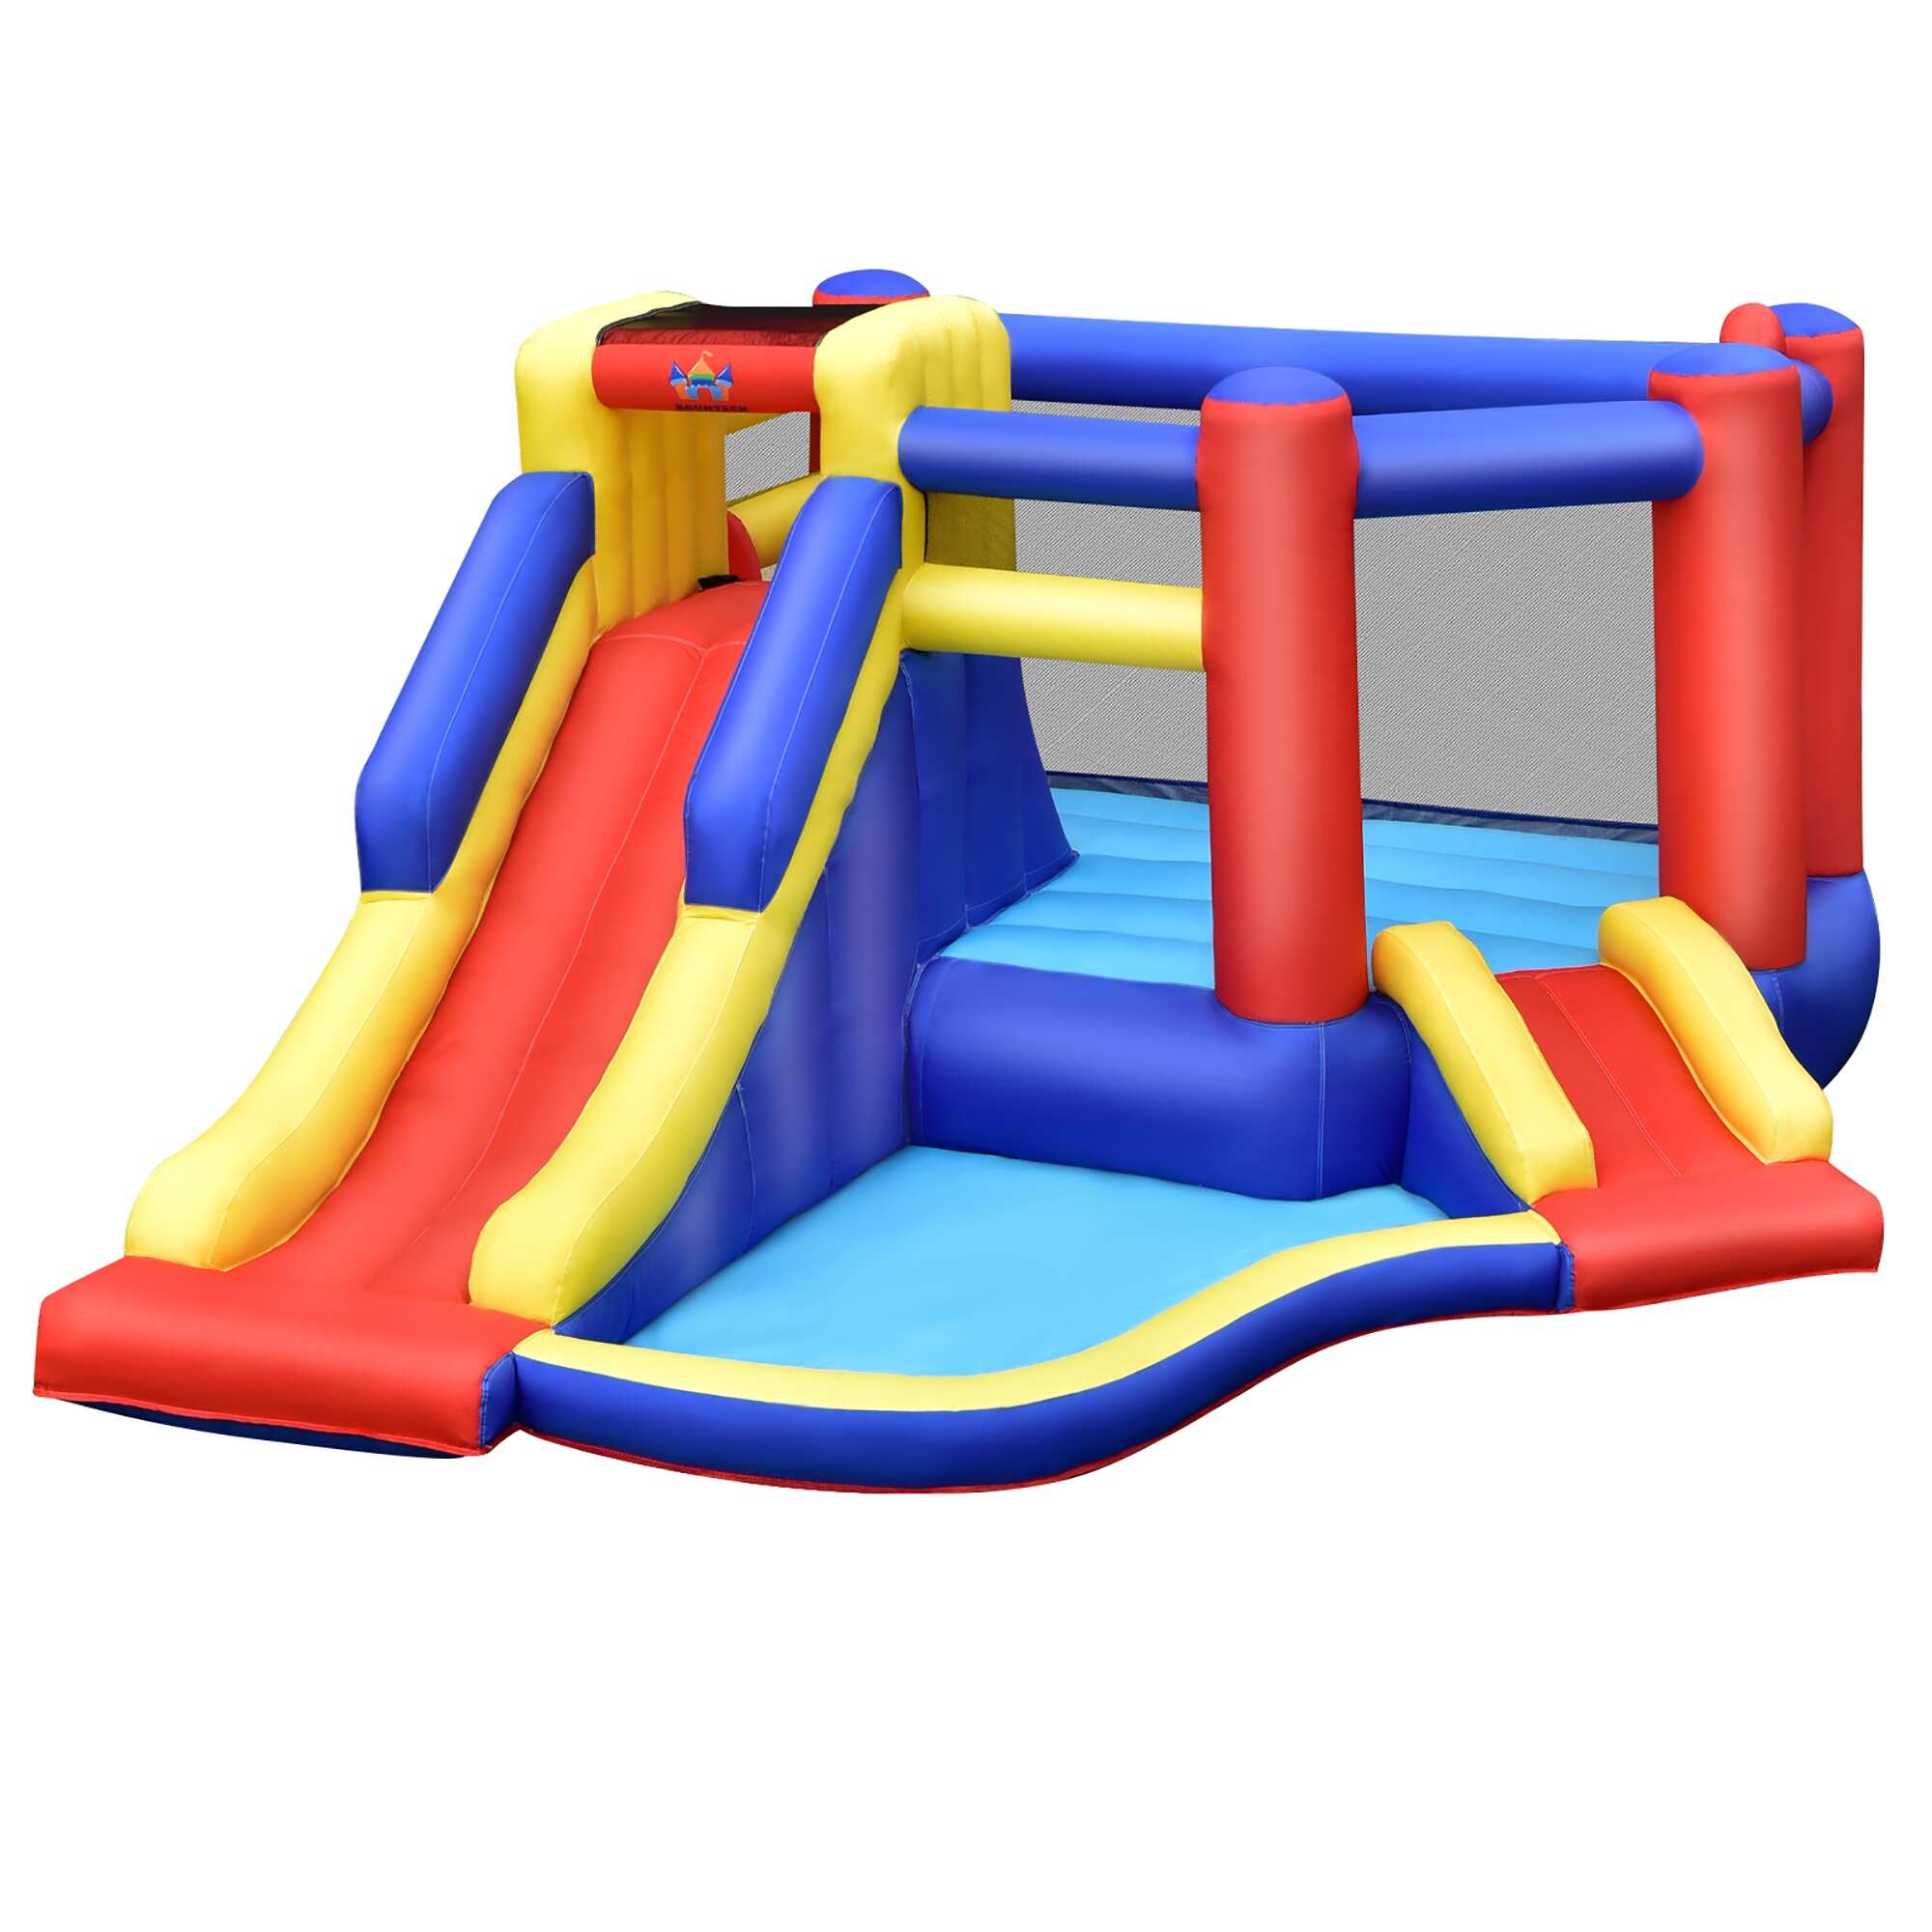 Costway Inflatable Bouncy Castle Kids Jumping House w/ Double Slides - See Details